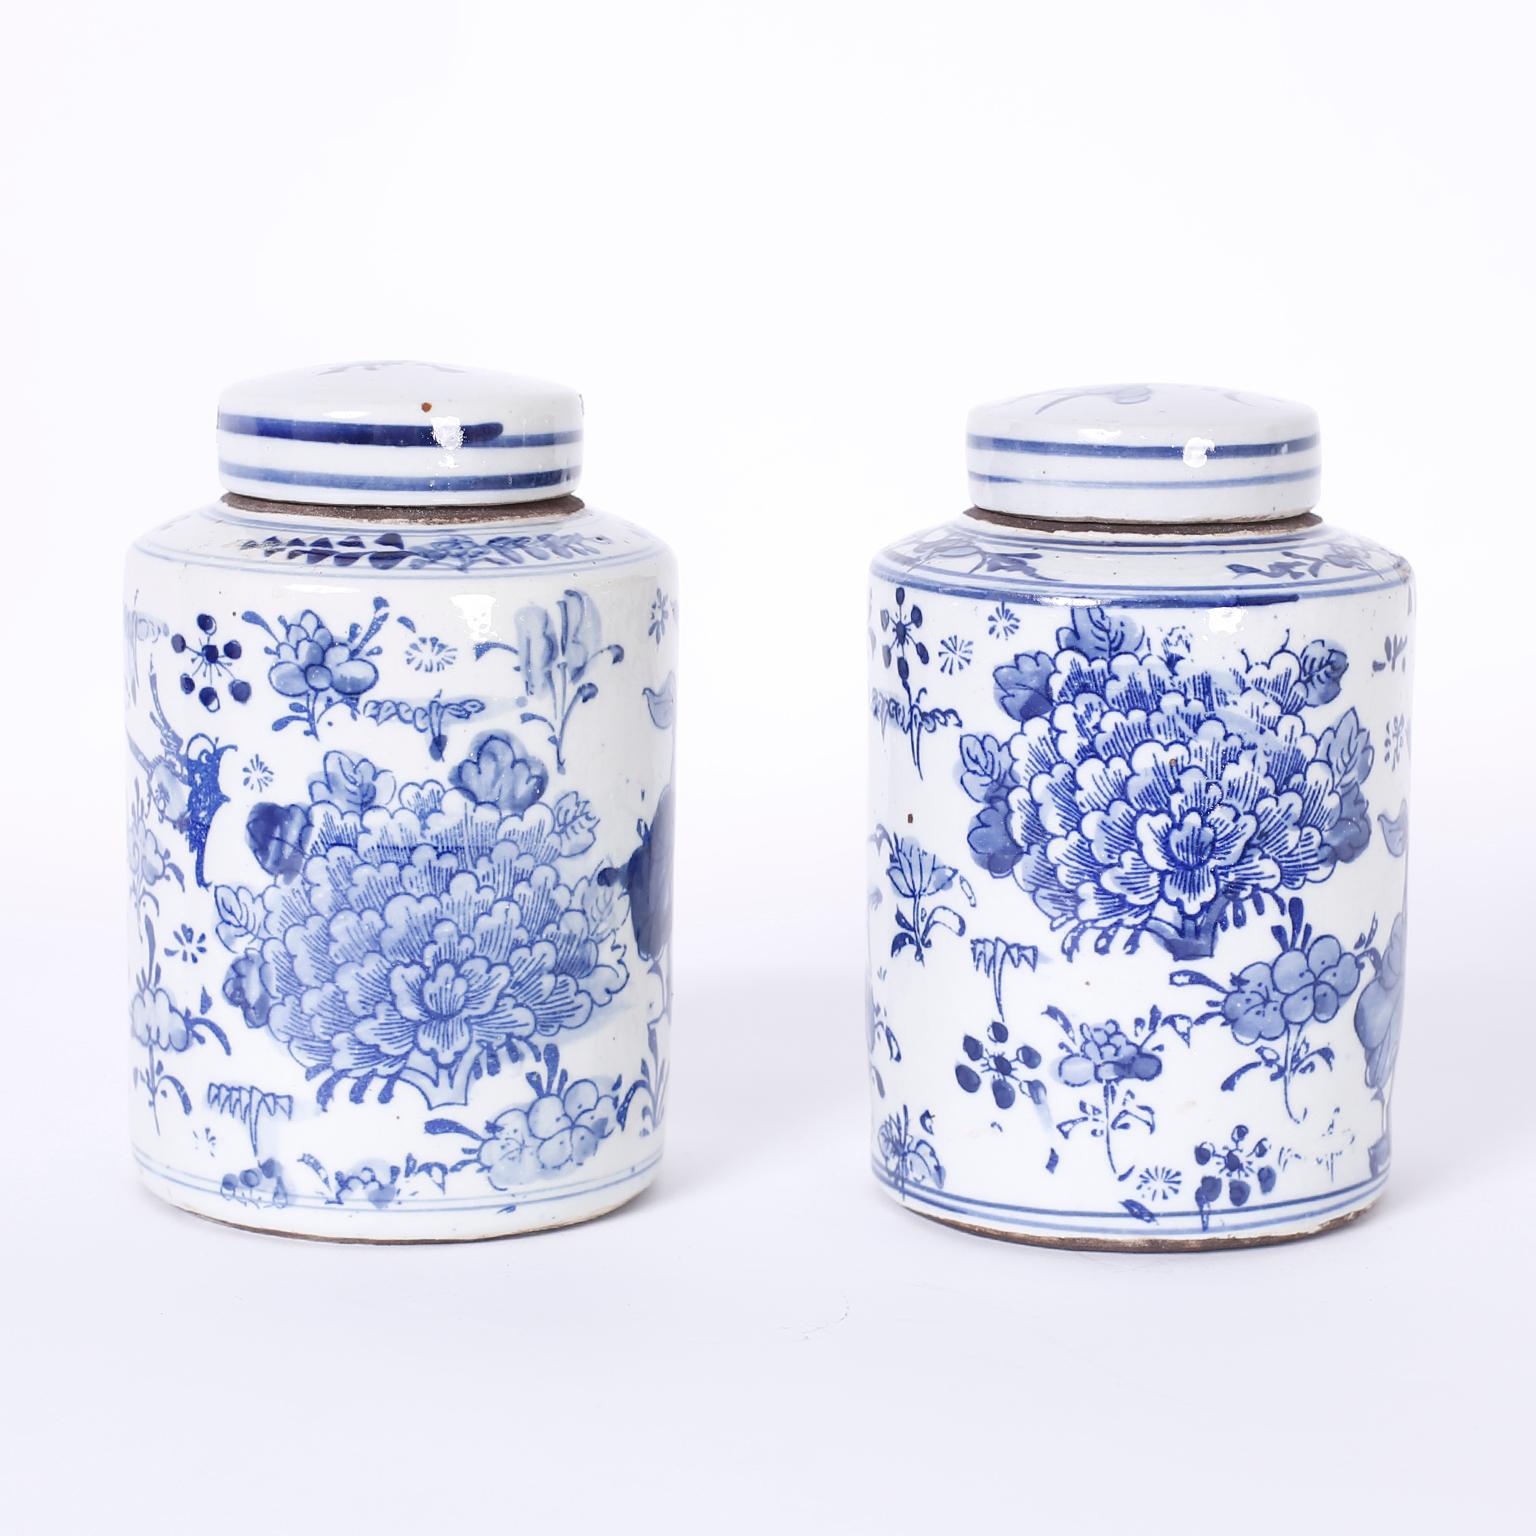 Pair of Chinese blue and white porcelain lidded ginger jars or canisters hand decorated with flowers and humming birds.